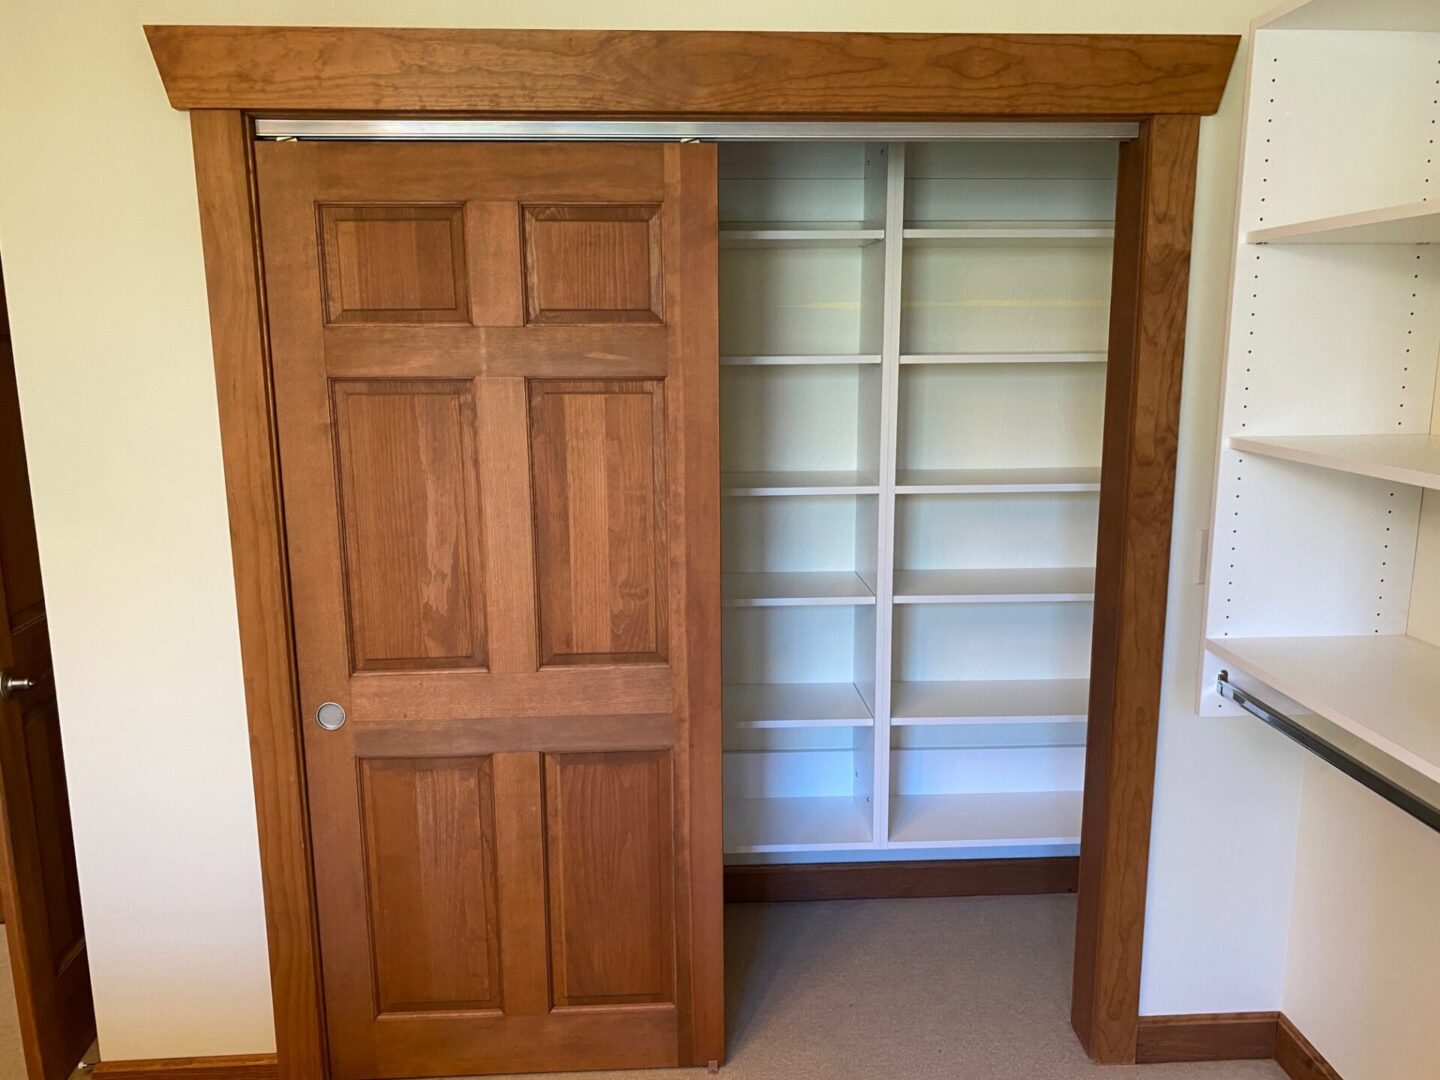 Close view of the wooden sliding door cabinet